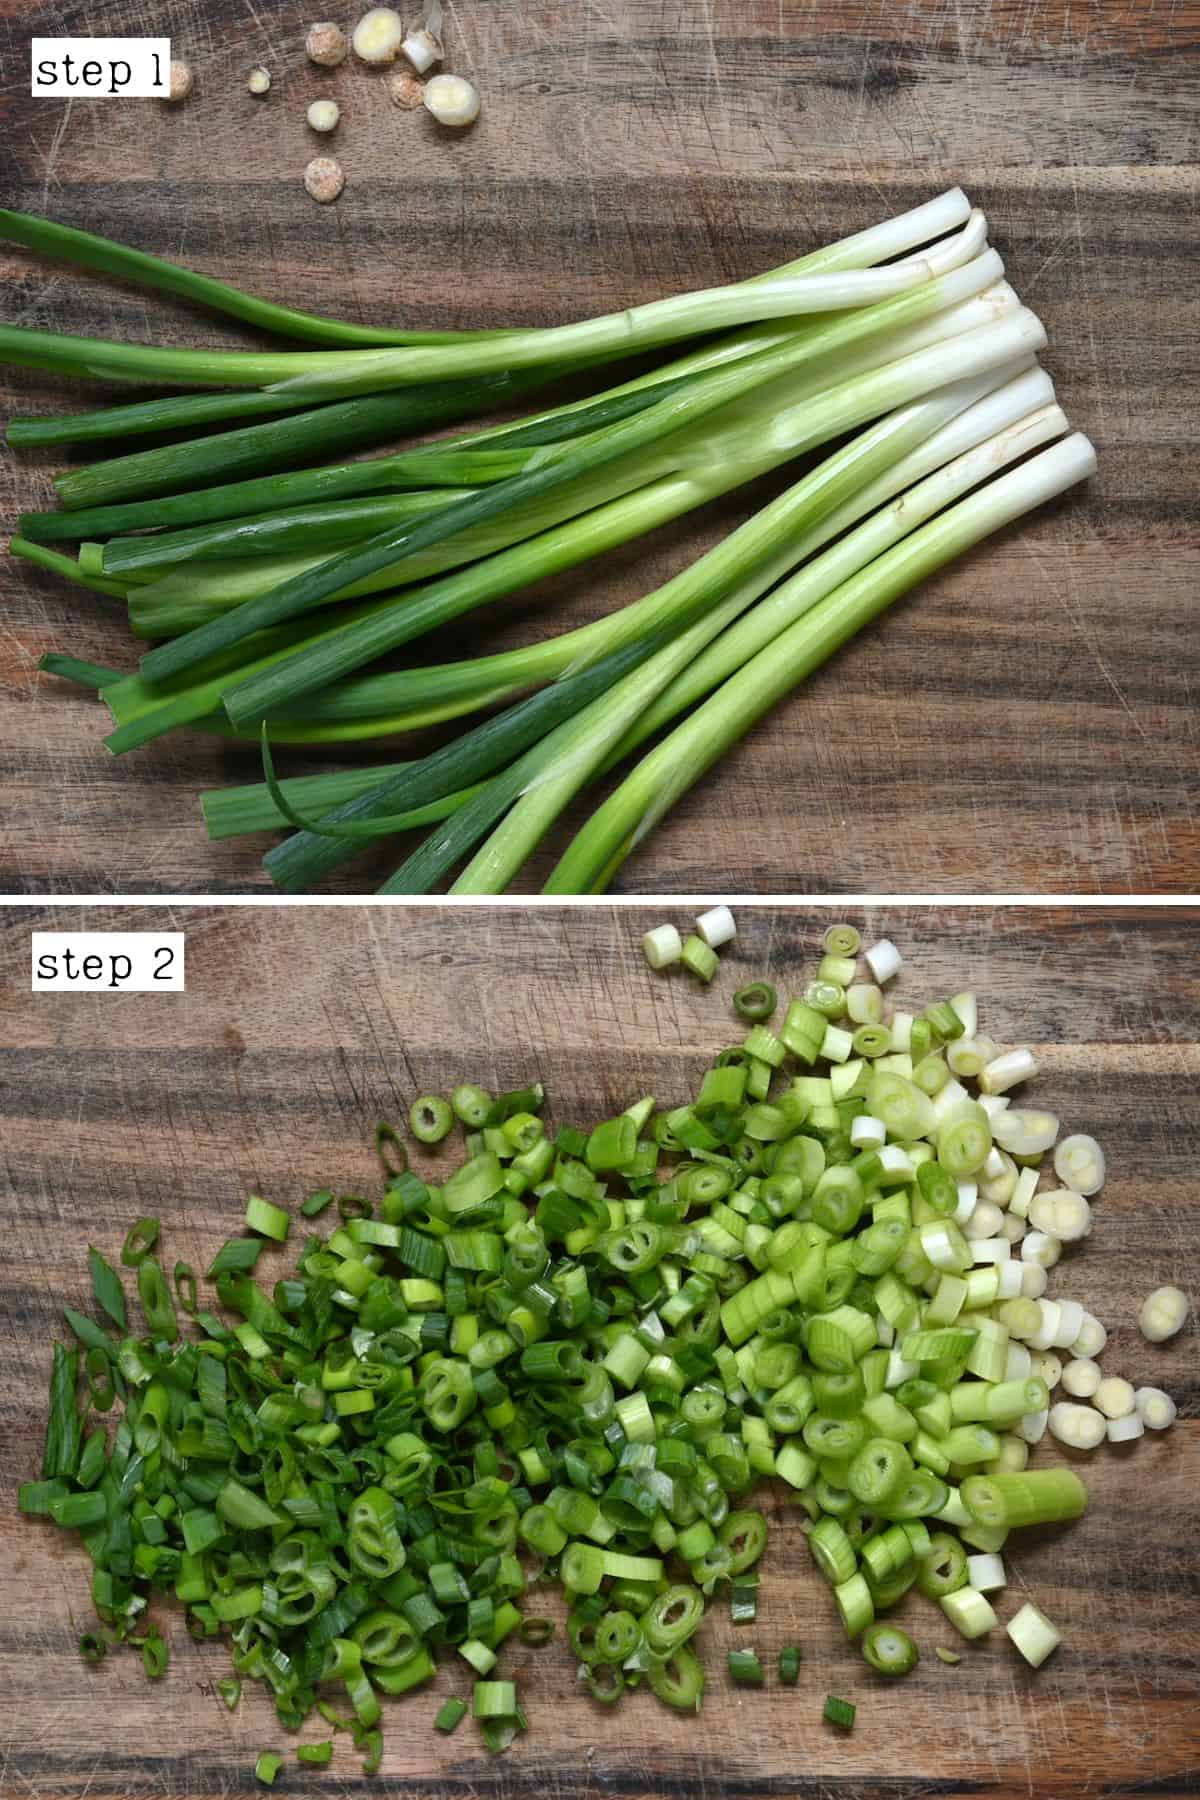 Steps for chopping green onions